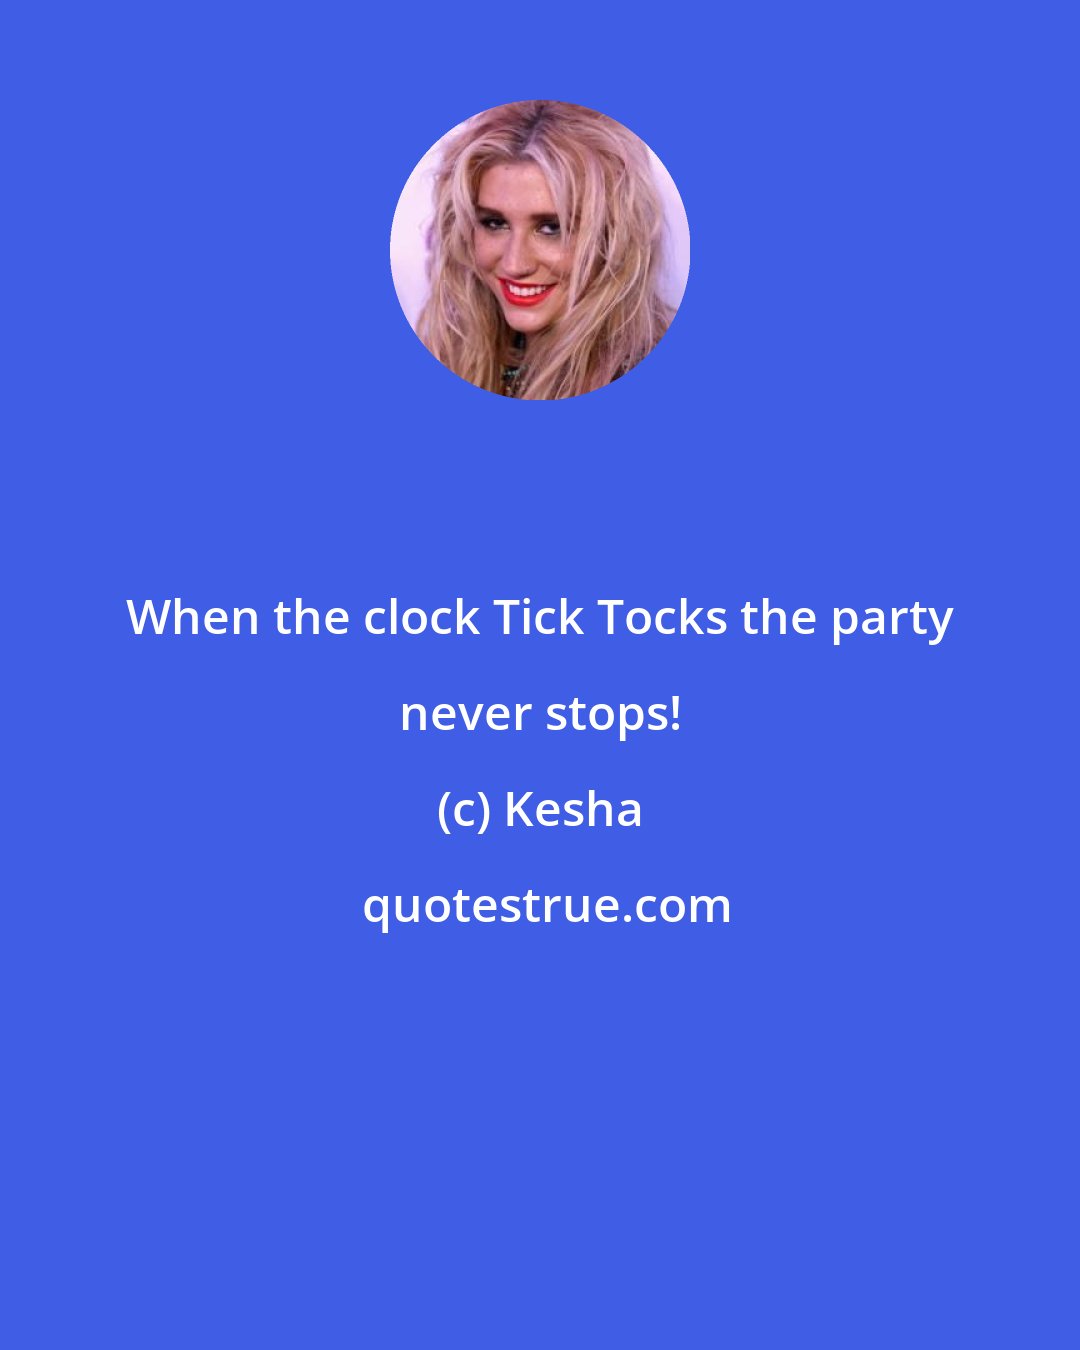 Kesha: When the clock Tick Tocks the party never stops!